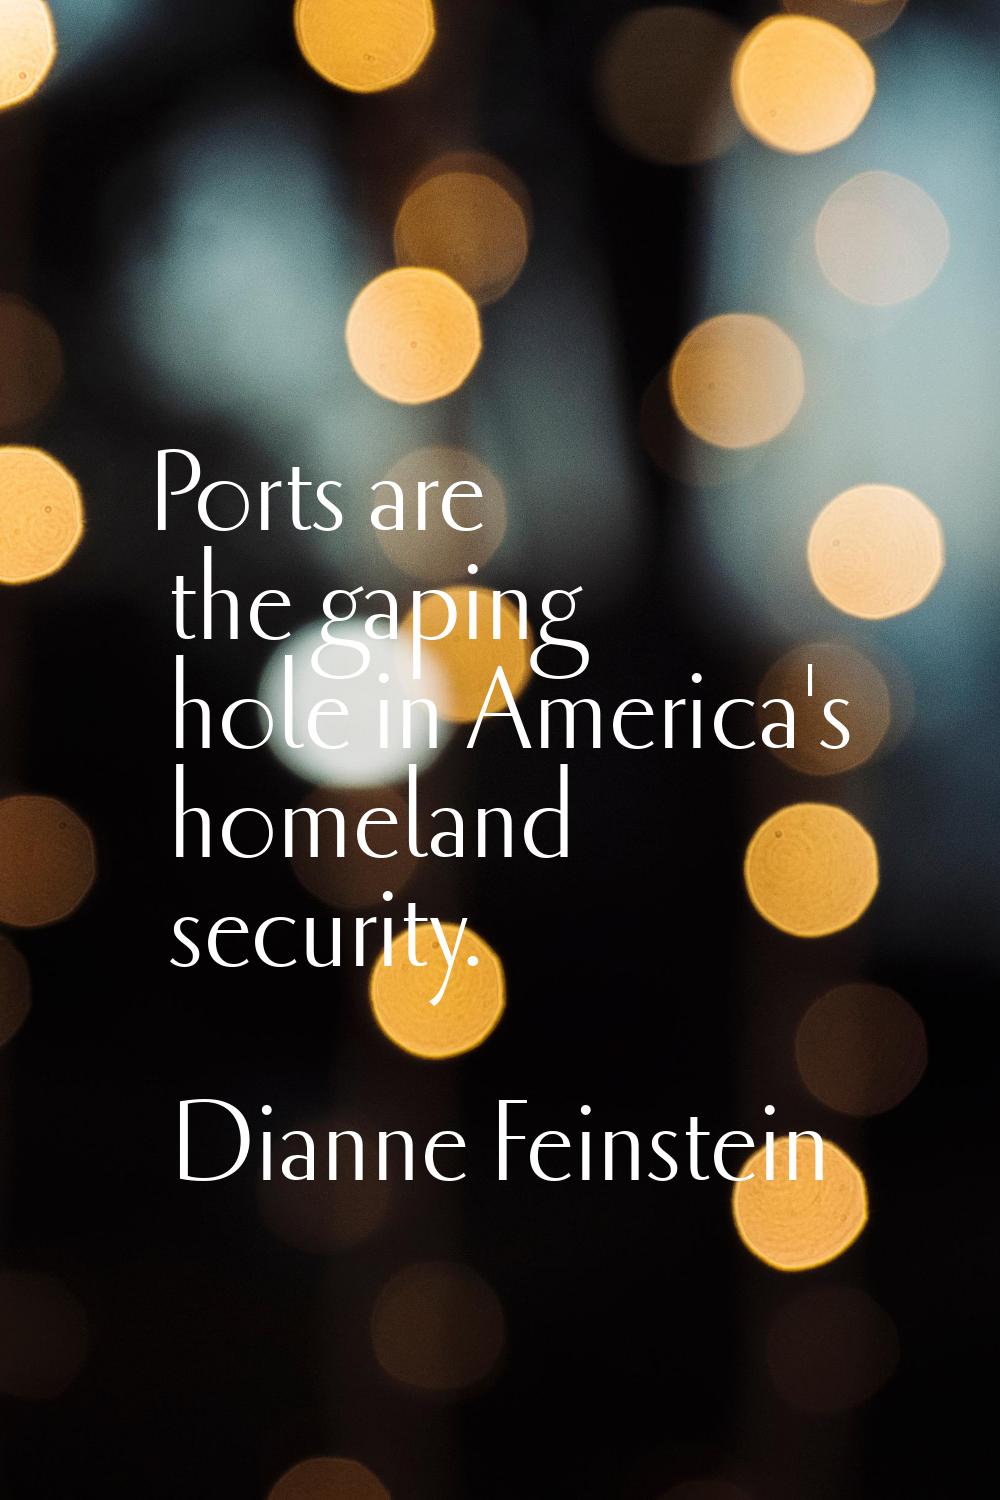 Ports are the gaping hole in America's homeland security.